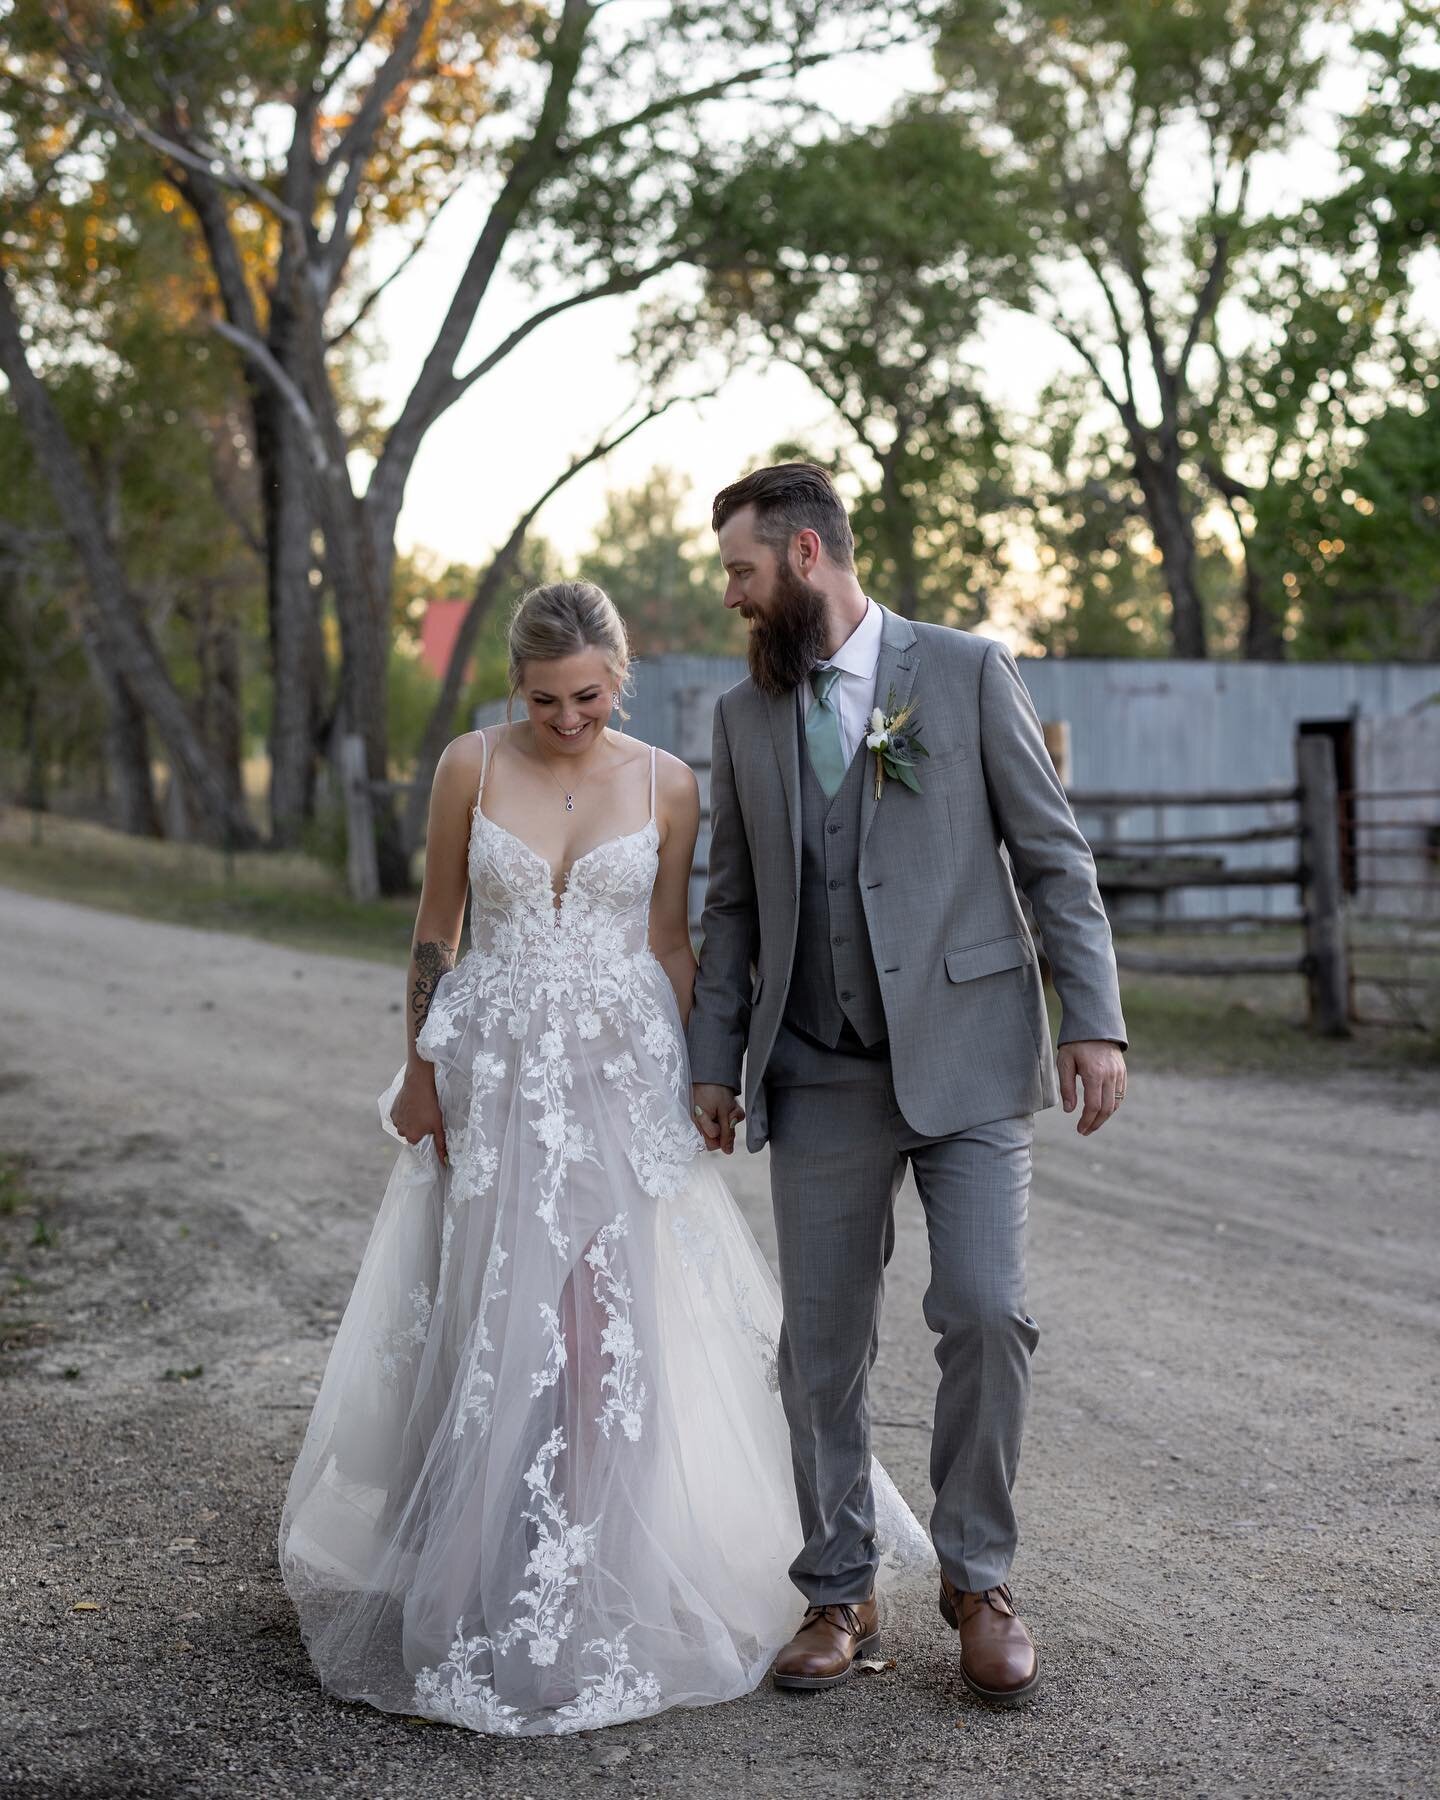 Congrats to Aaron and Stephanie! Thank you for sharing such a perfect day with us!

Bride: @stephj_8 
Groom: @aaron.cook659365 
Makeup Artist: @groovybabe_beauty 
Gown: @somethingnewboutique 
Floral: @johnny_appleseed_greenhouse 
Venue: @bessemermoun